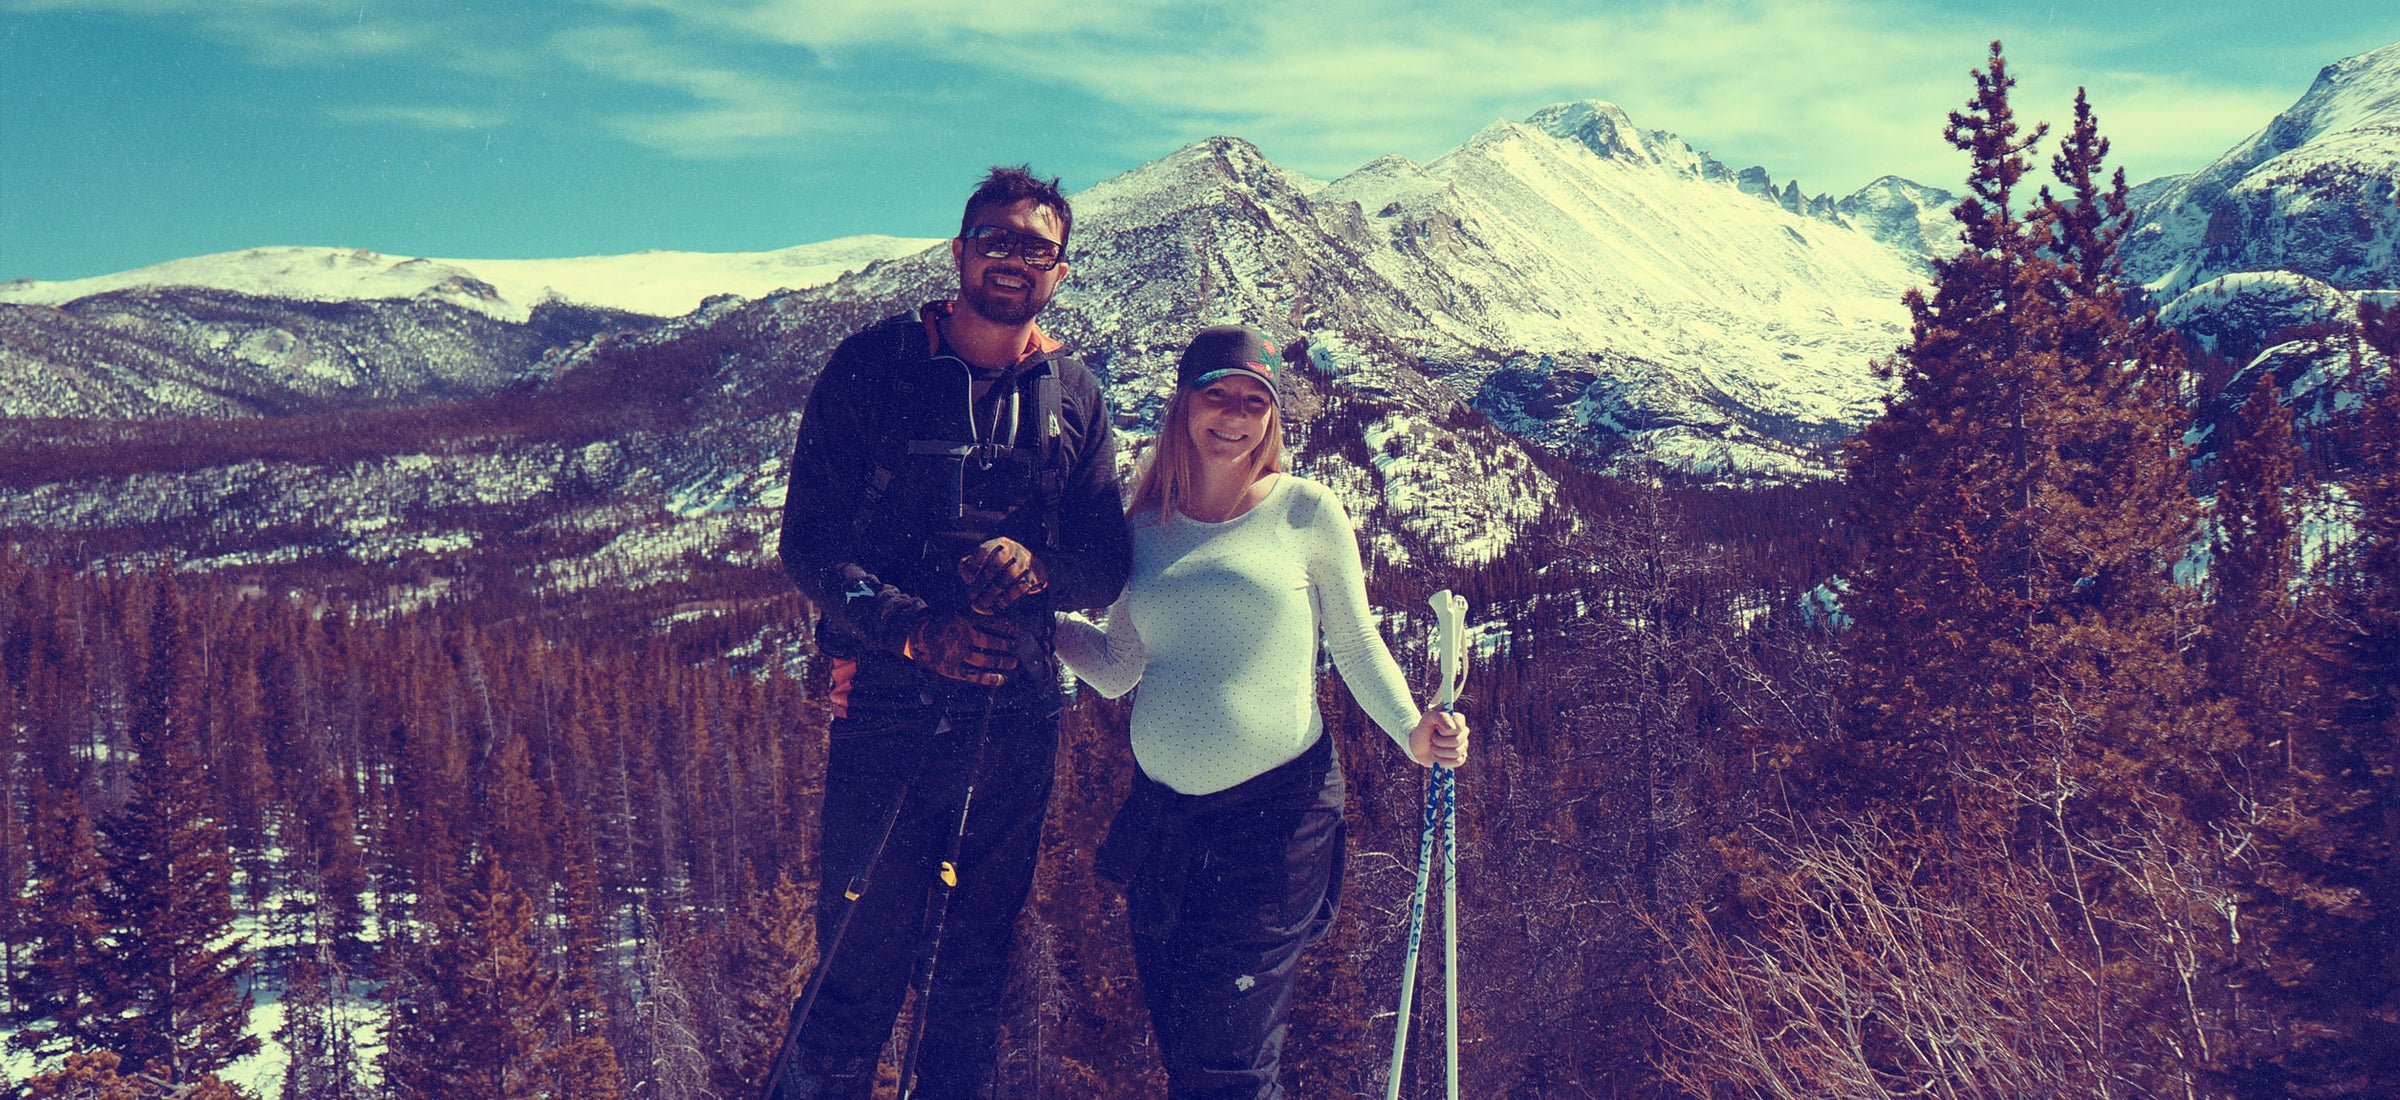 Milk x Whiskey - Created with Love of the outdoors - A soon to be young couple, mother is pregnant, snow hiking in the mountains. Ready for the next greatest Adventure.